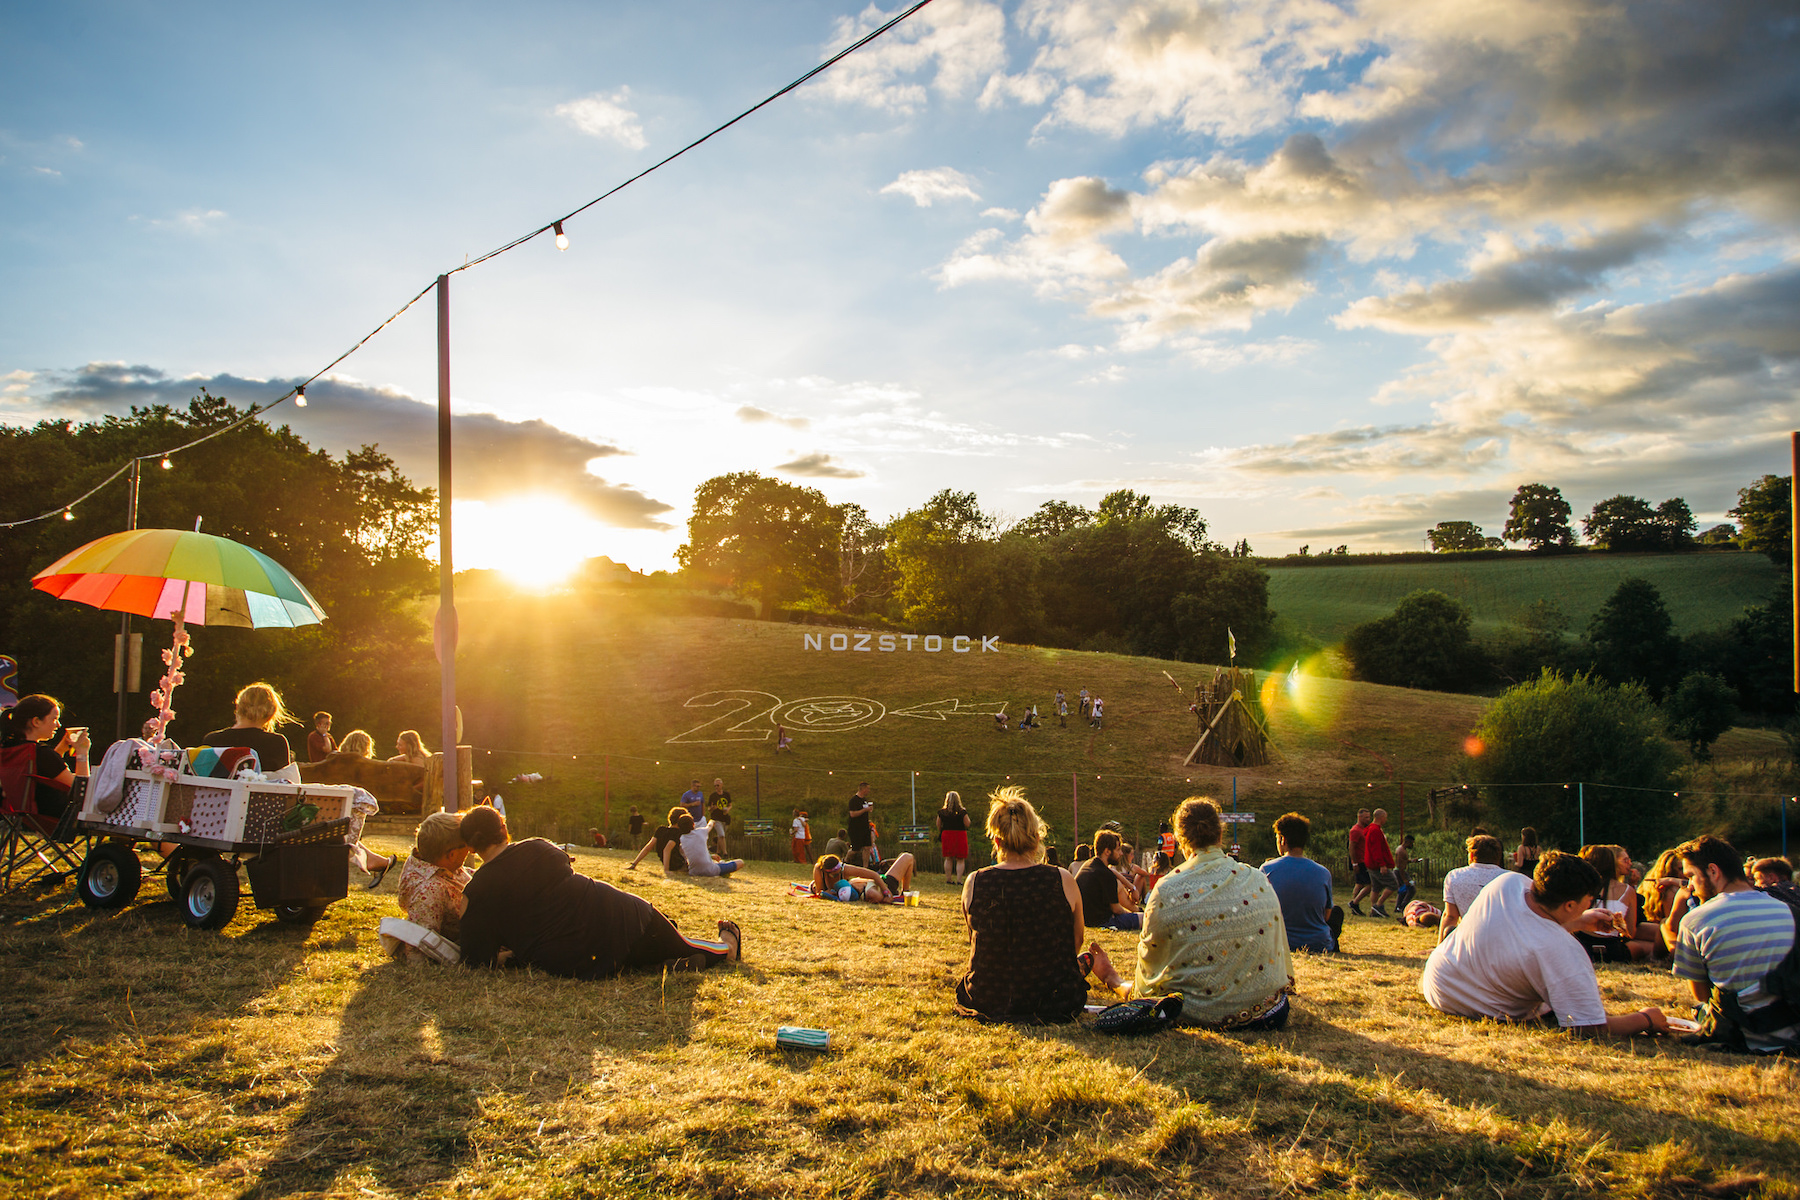 Nozstock 2019 - the family-run festival is back next weekend for its 21st year! Credit@ChloeKnott